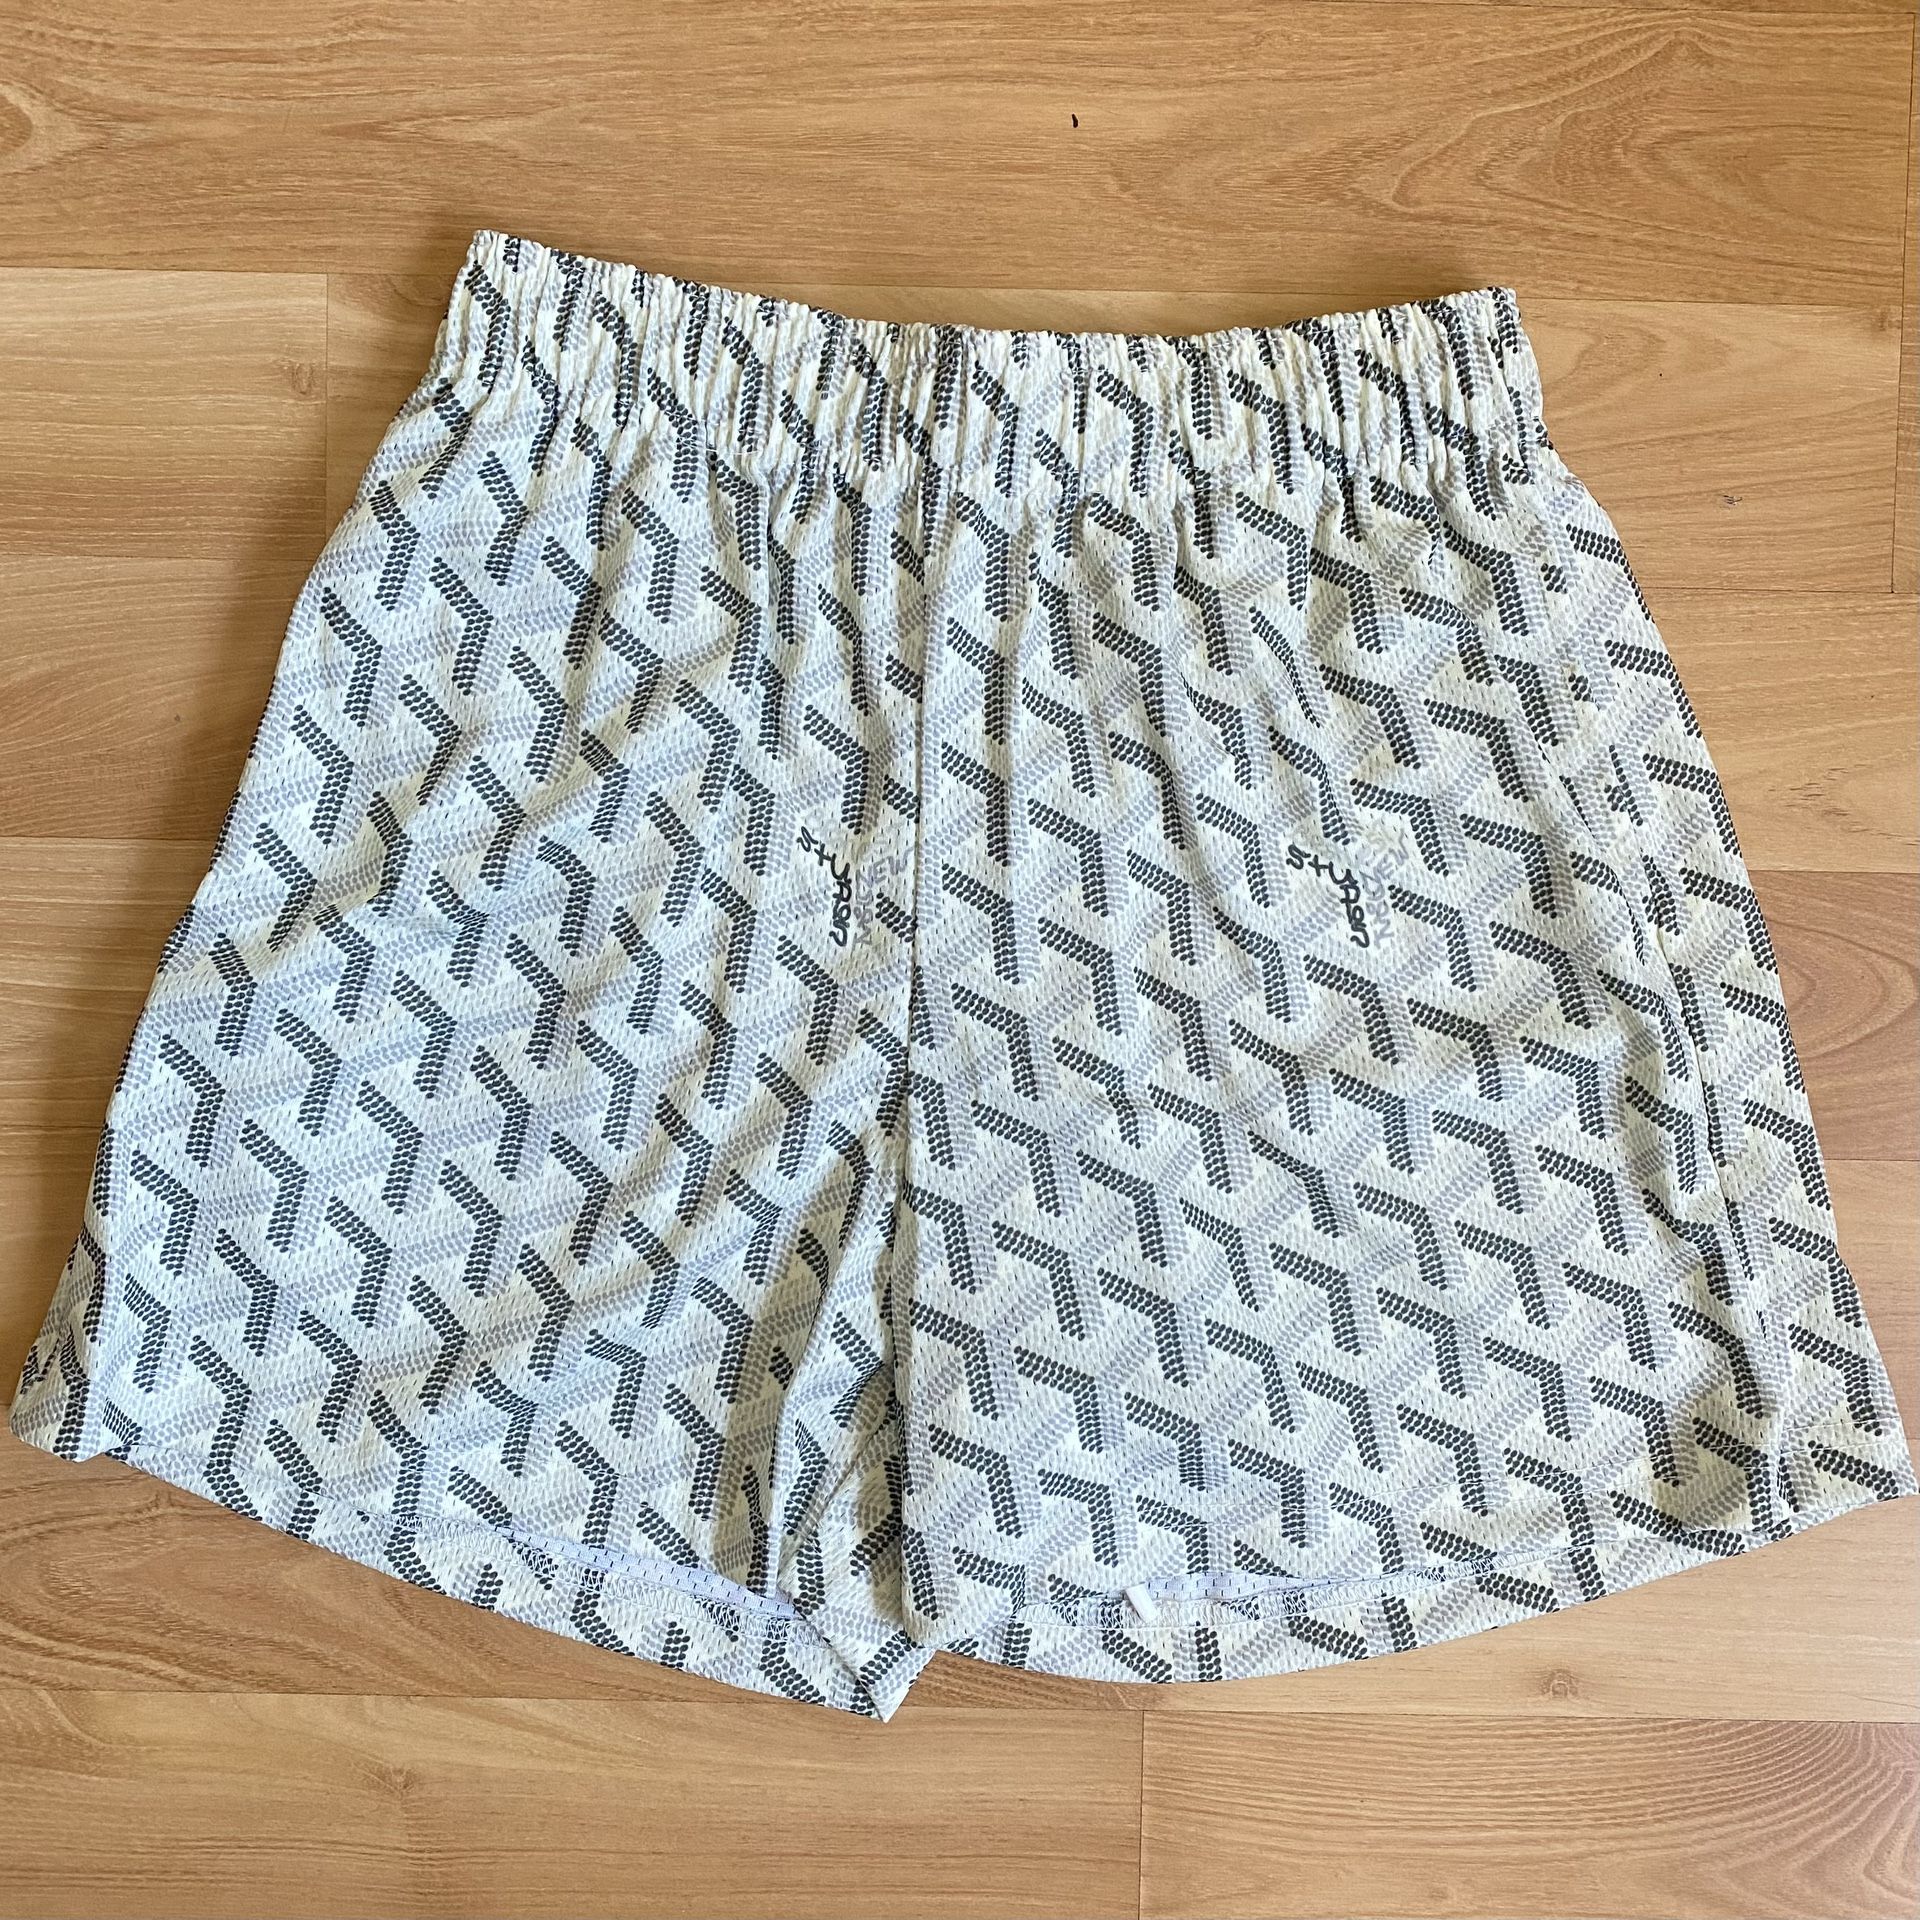 Bravest Studios Lakeshow Shorts (White) for Sale in Los Angeles, CA -  OfferUp